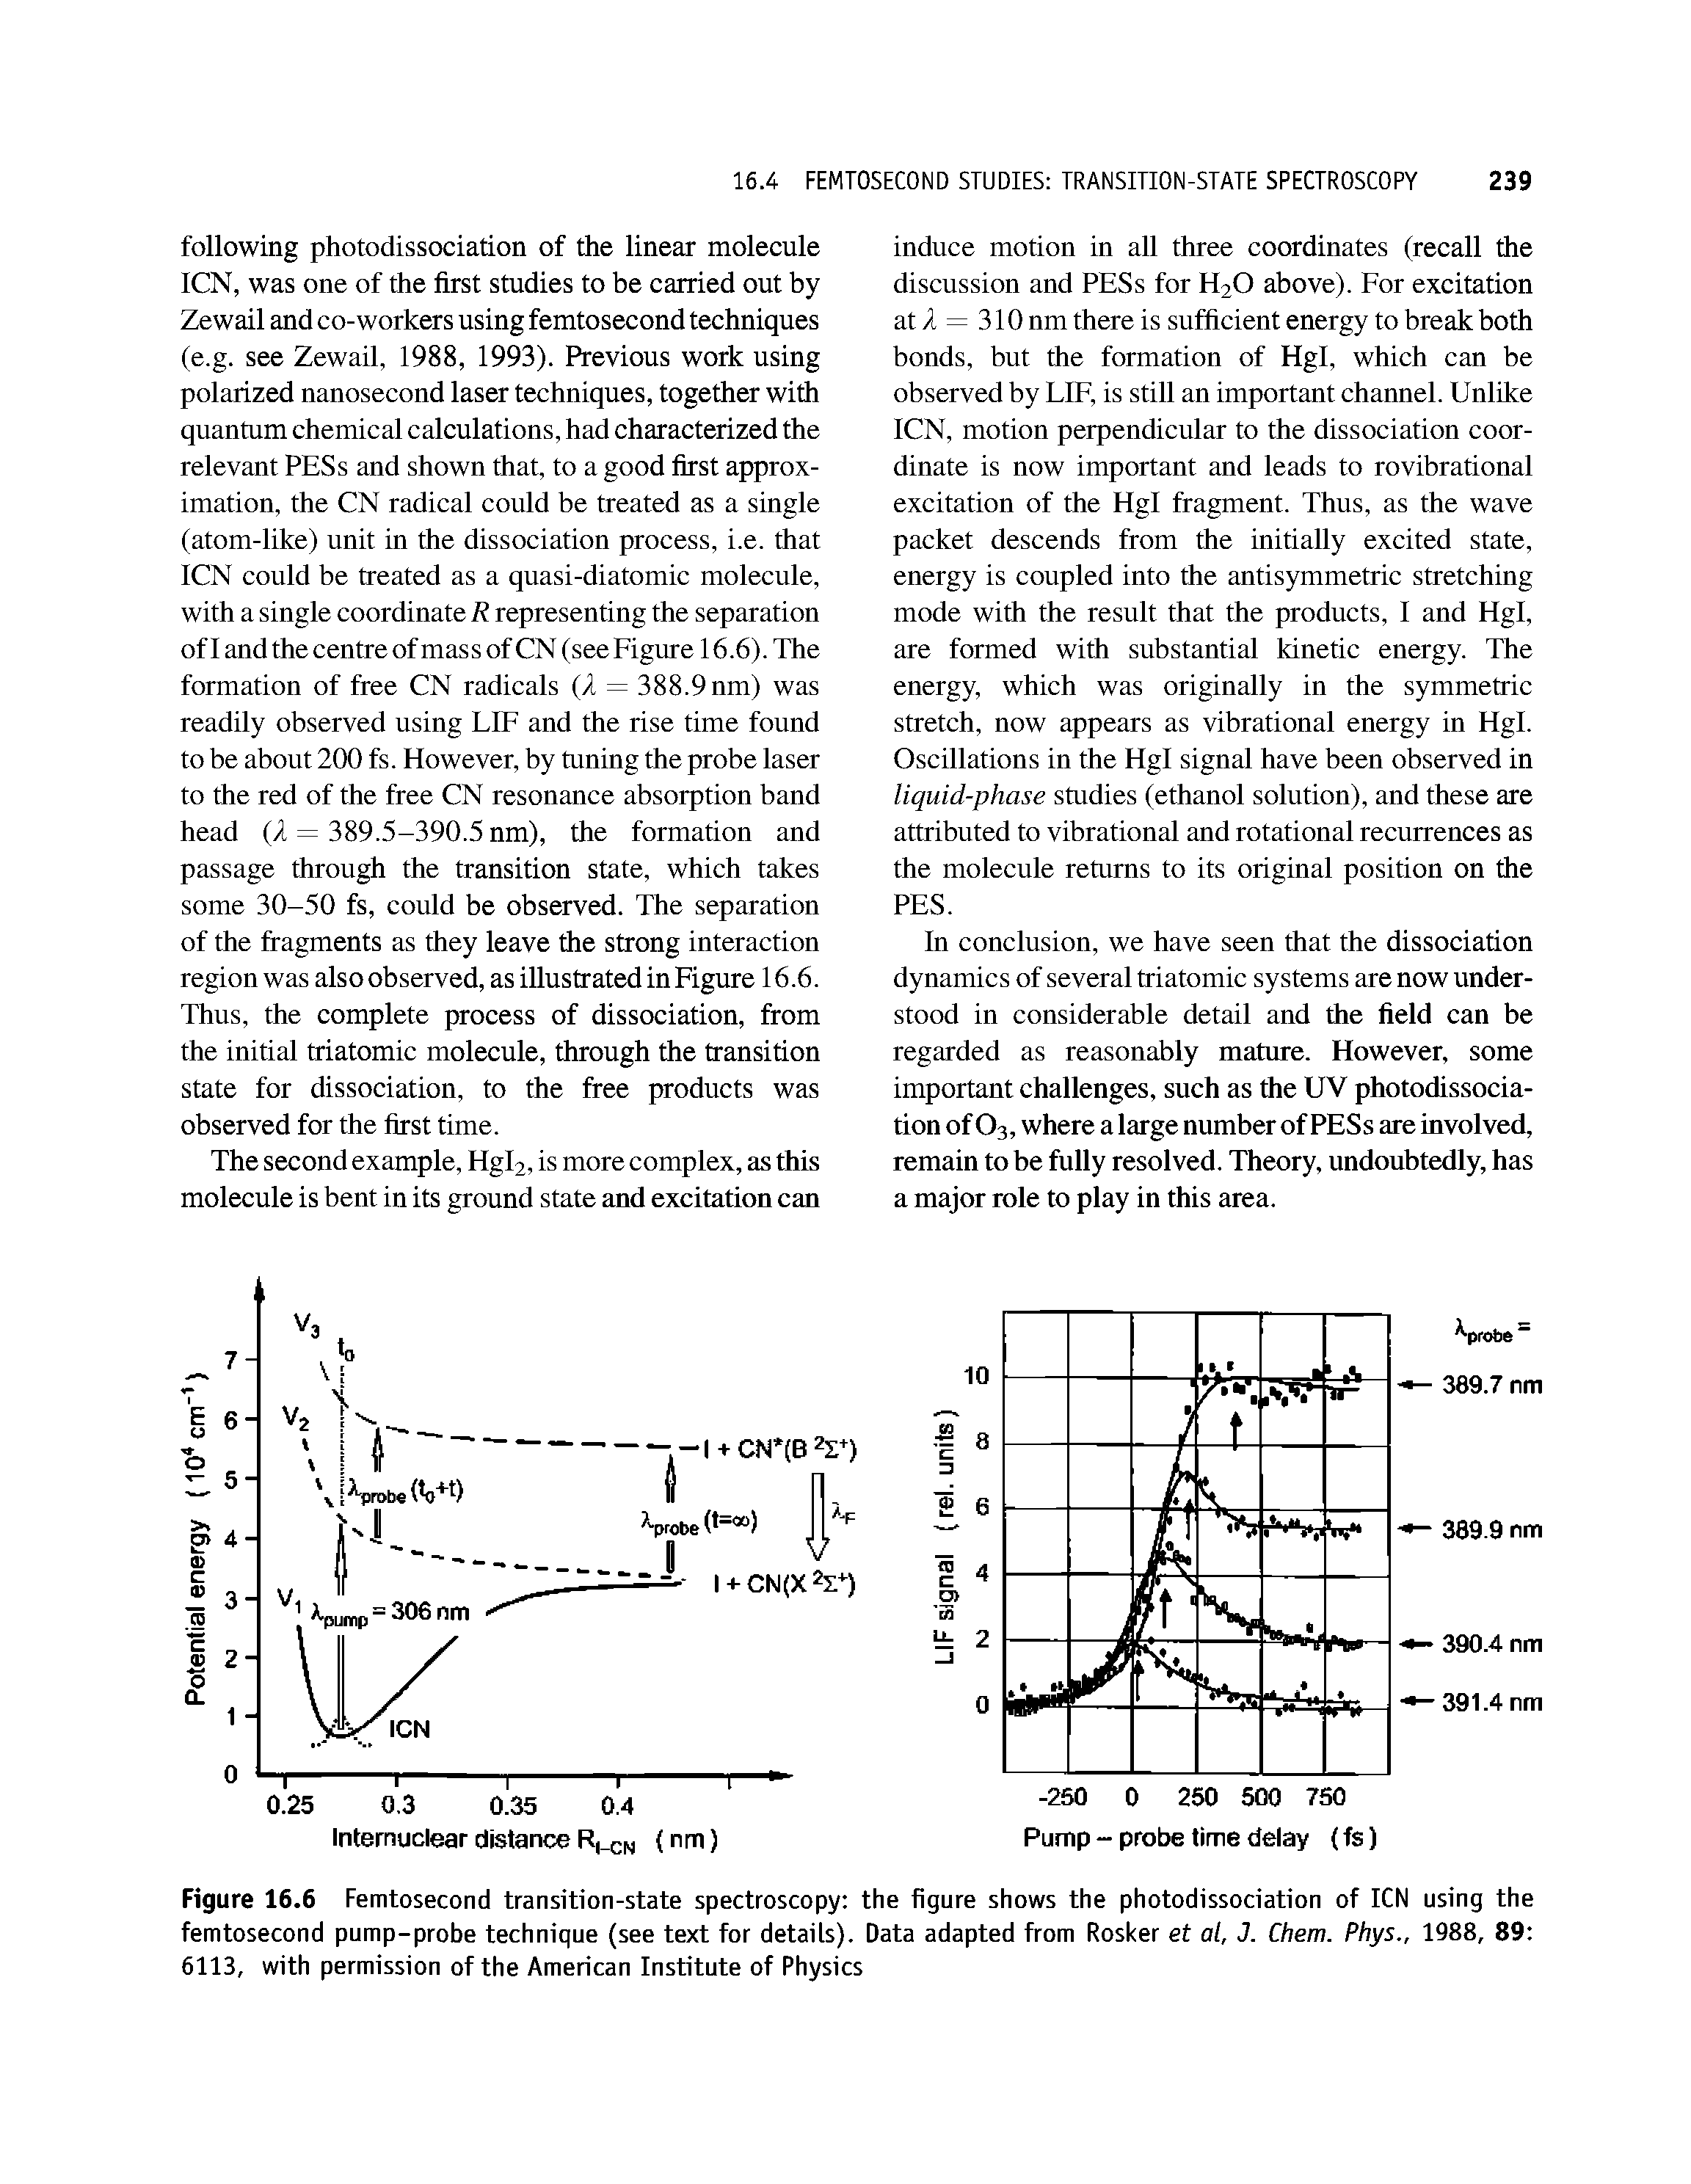 Figure 16.6 Femtosecond transition-state spectroscopy the figure shows the photodissociation of ICN femtosecond pump-probe technique (see text for details). Data adapted from Rosker et at, J. Chem. Phys., 6113, with permission of the American Institute of Physics...